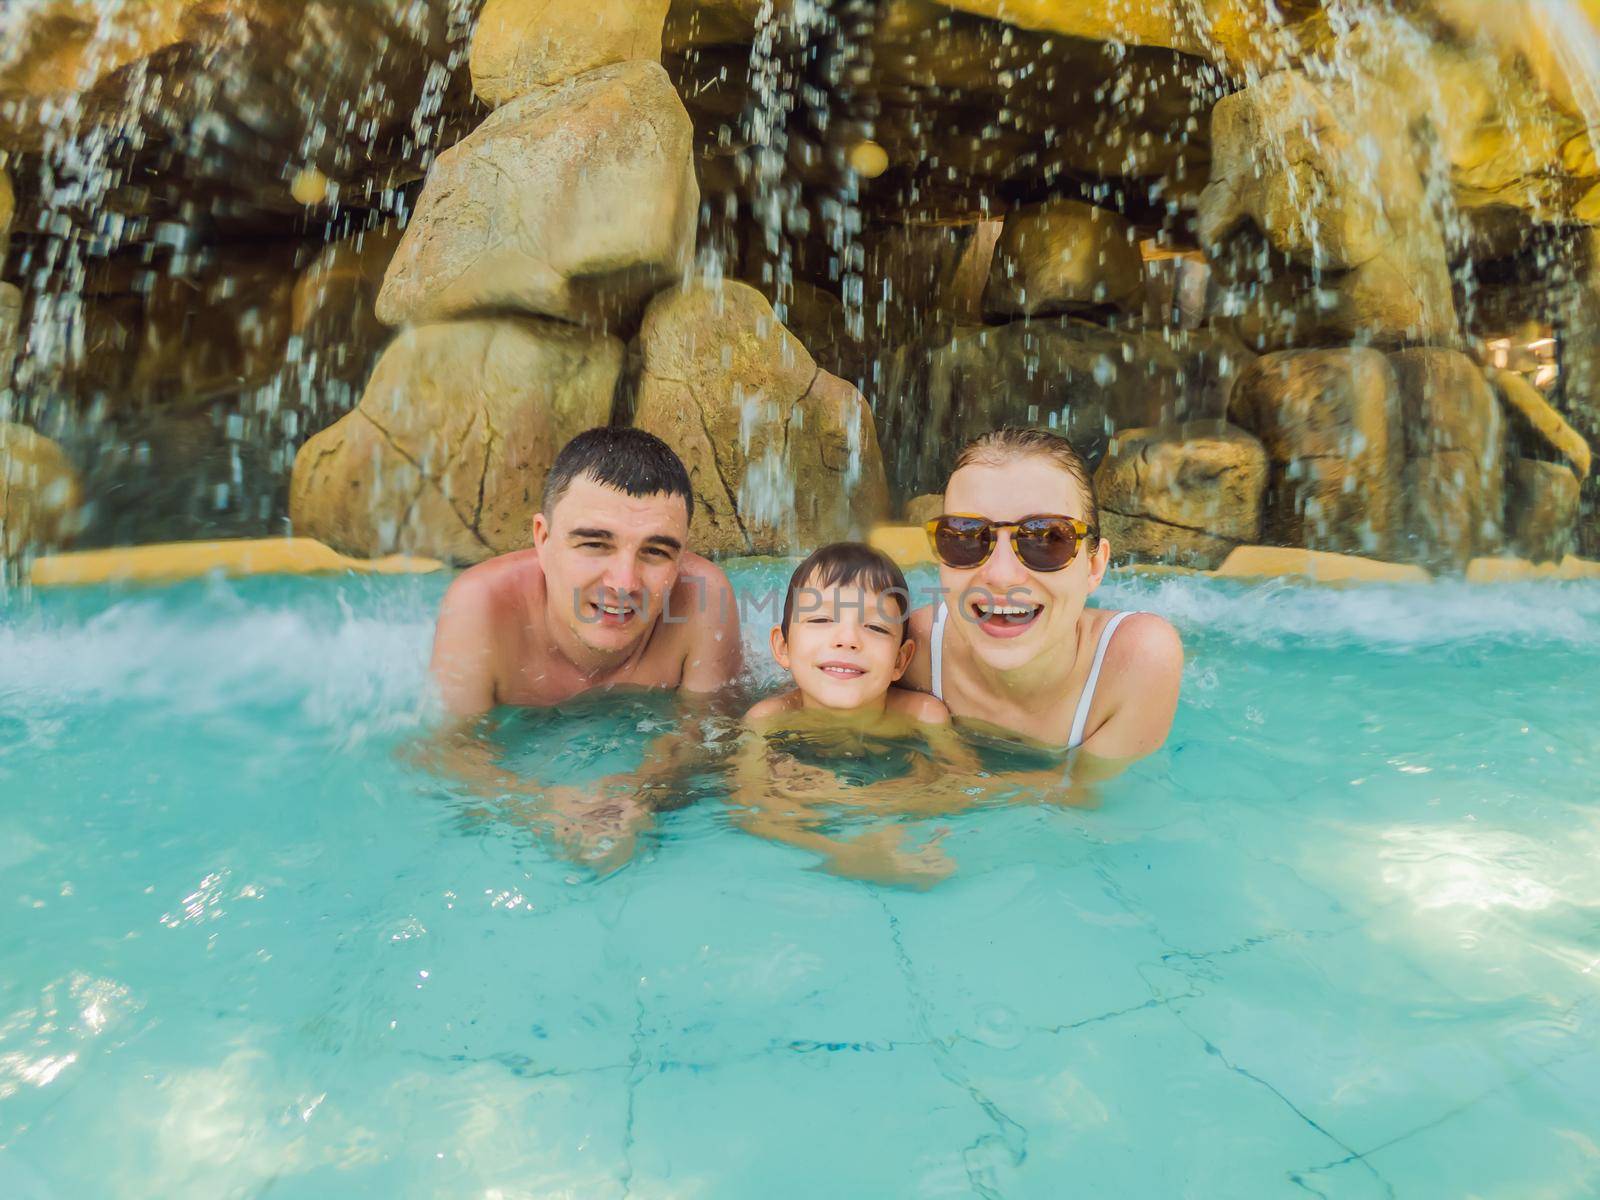 Happy family on holidays swimming with fun in waterfall pool. Active lifestyle, people outdoor travel activity on summer vacation on tropical island.